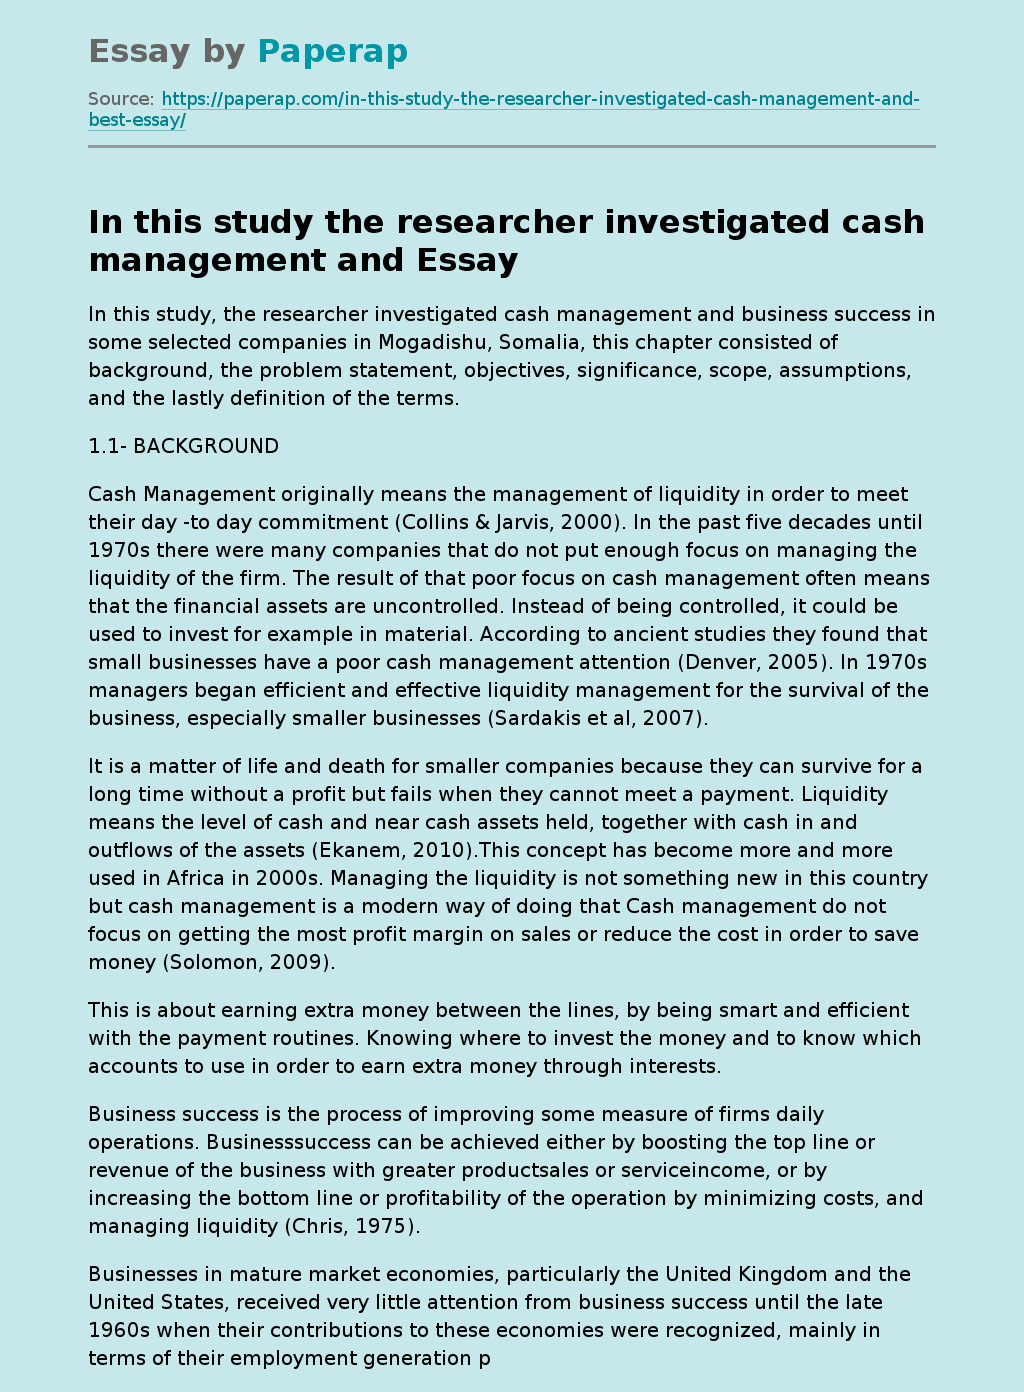 In this study the researcher investigated cash management and